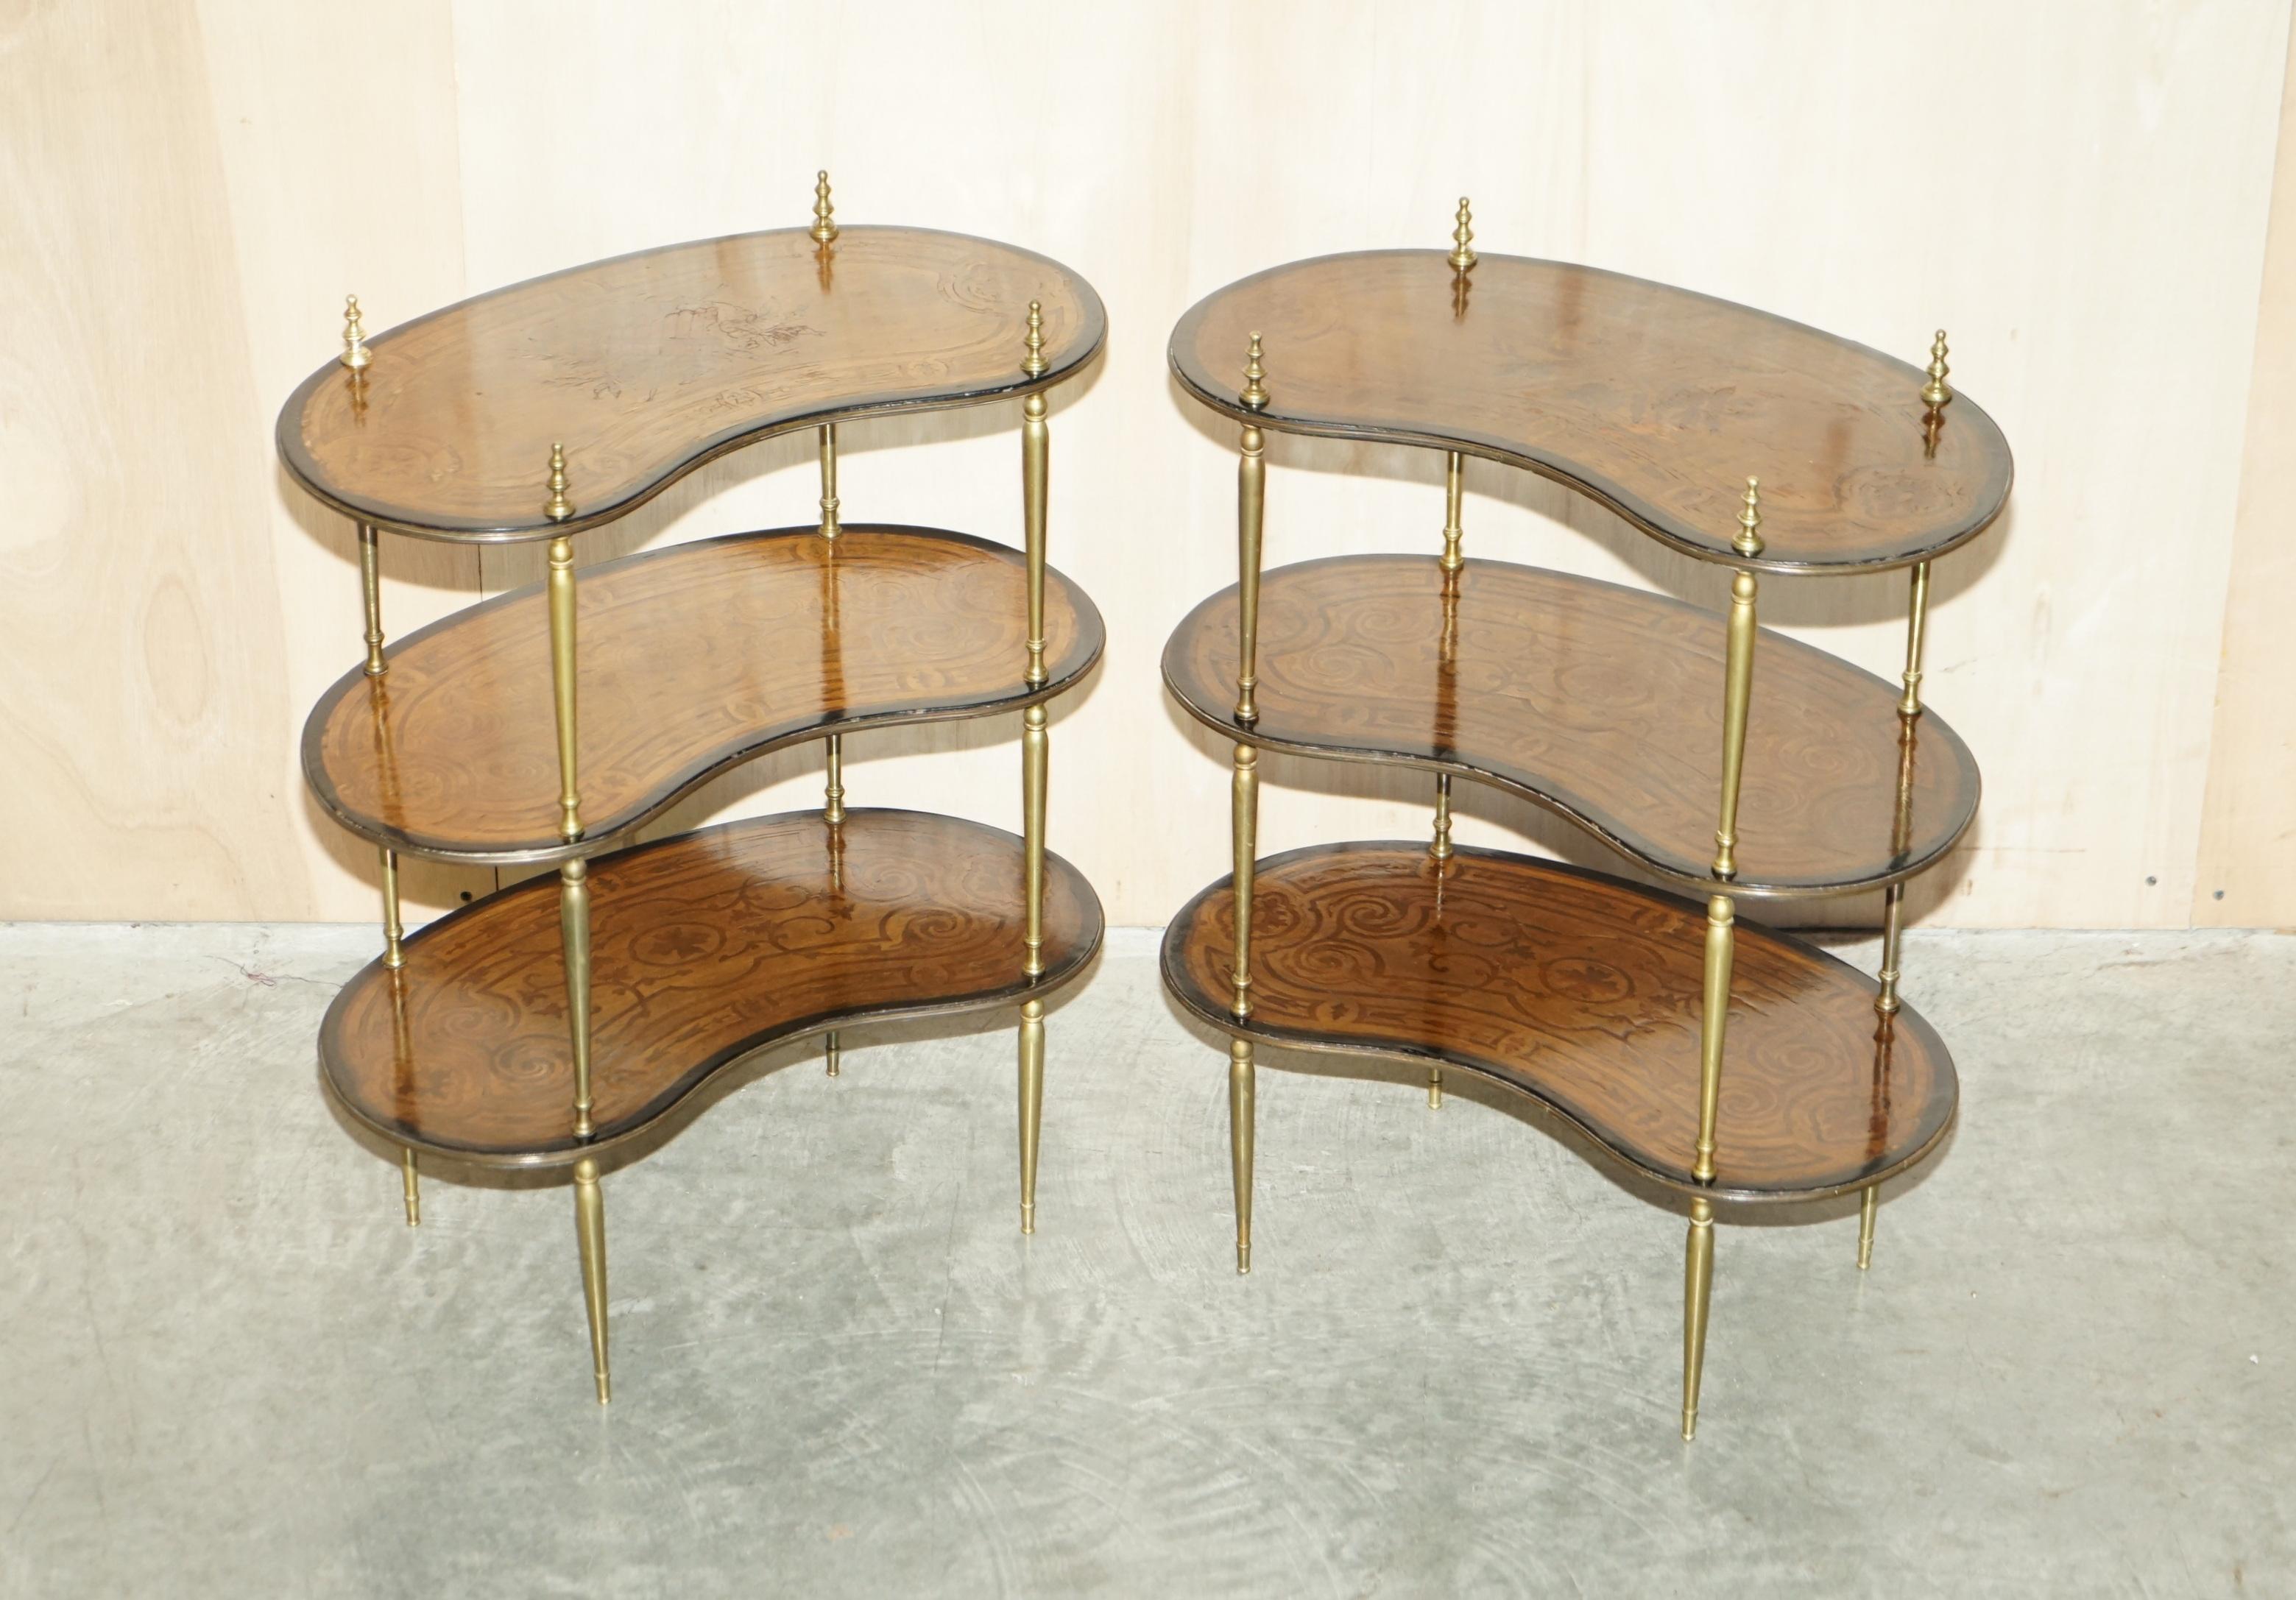 We are delighted to offer for sale this pair of stunning, highly collectable circa 1880 Continental kidney shaped Etagere three tier tables

A truly stunning pair, I have never seen another matching set of three tiered, kidney shaped Etagere’s